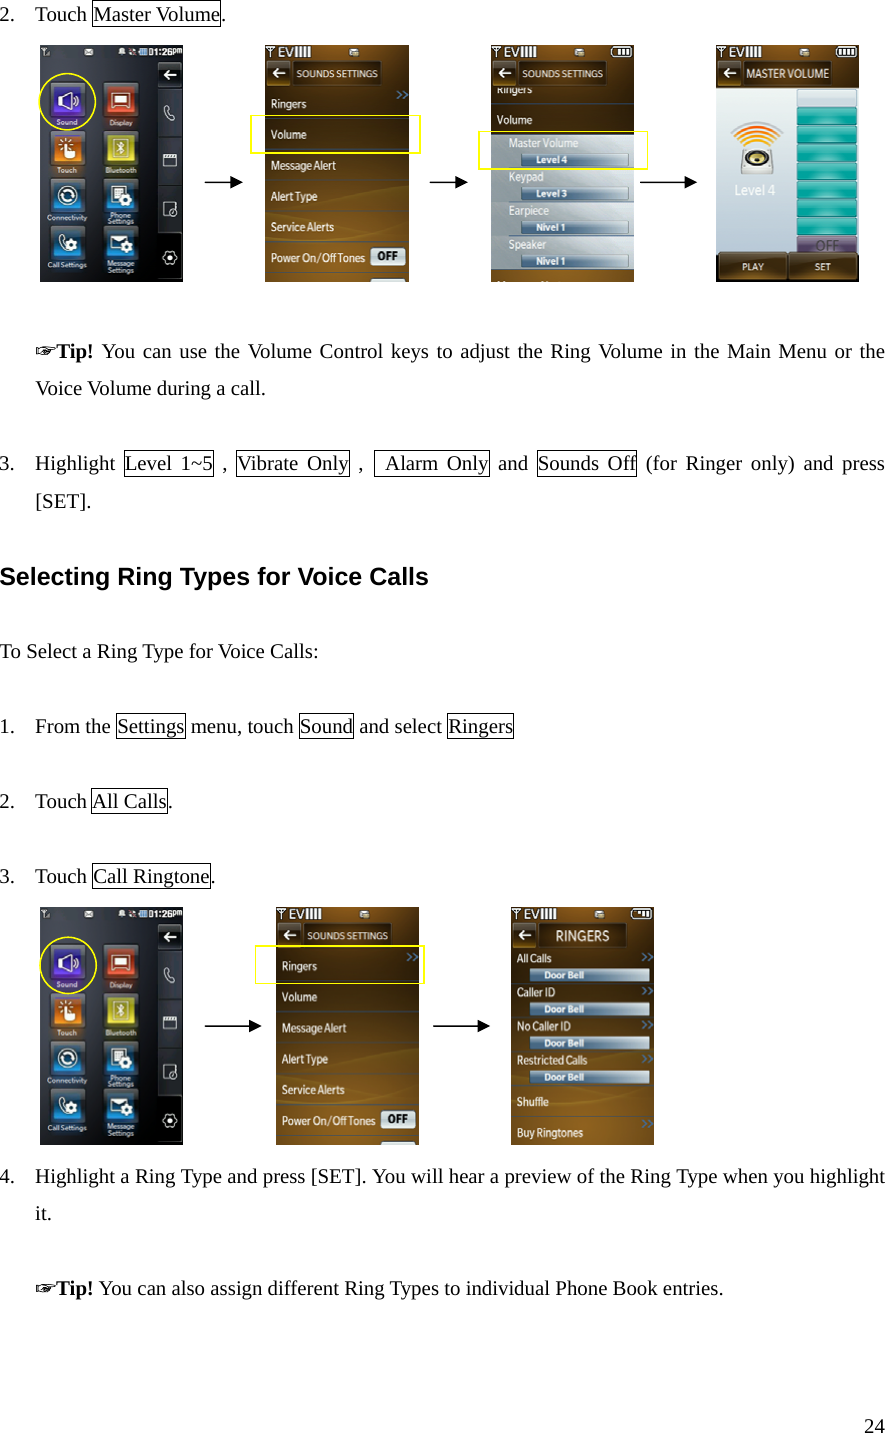 24 2. Touch Master Volume.                                   ☞Tip! You can use the Volume Control keys to adjust the Ring Volume in the Main Menu or the Voice Volume during a call.  3. Highlight Level 1~5 , Vibrate Only ,  Alarm Only and Sounds Off (for Ringer only) and press [SET].  Selecting Ring Types for Voice Calls  To Select a Ring Type for Voice Calls:  1. From the Settings menu, touch Sound and select Ringers  2. Touch All Calls.  3. Touch Call Ringtone.                       4. Highlight a Ring Type and press [SET]. You will hear a preview of the Ring Type when you highlight it.  ☞Tip! You can also assign different Ring Types to individual Phone Book entries.  